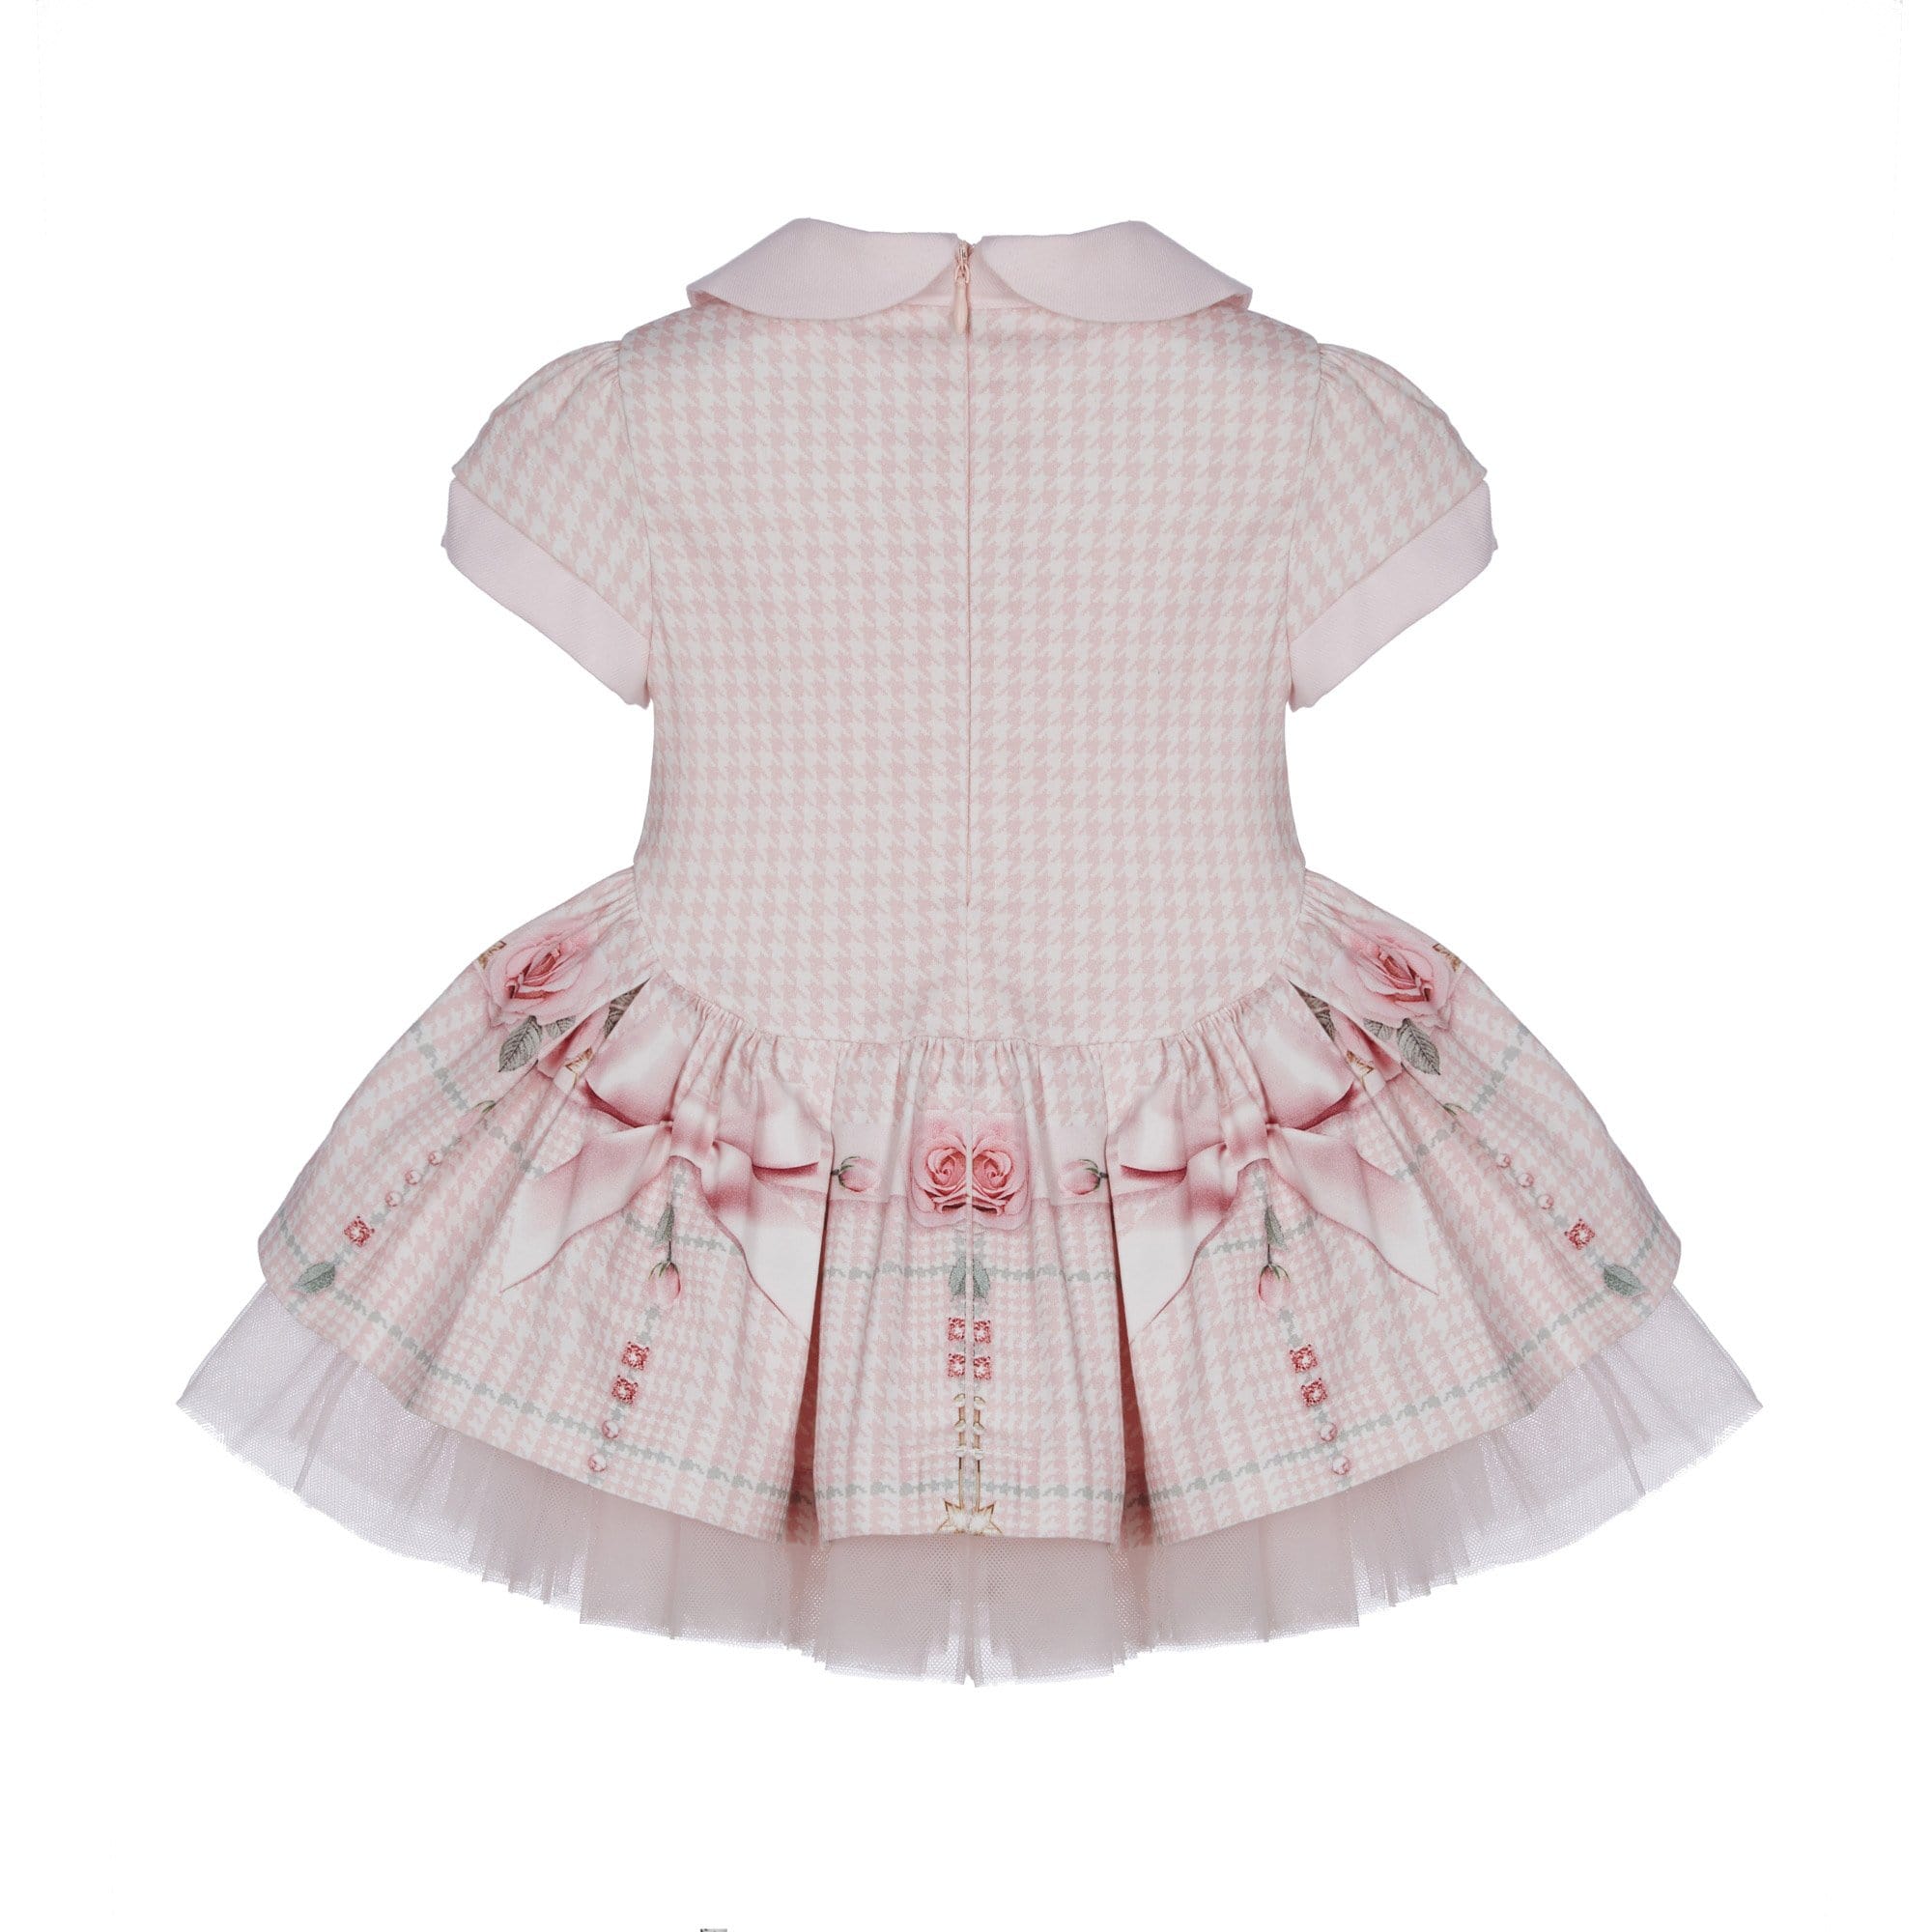 LAPIN HOUSE - Dog Tooth Tule Dress - Pink